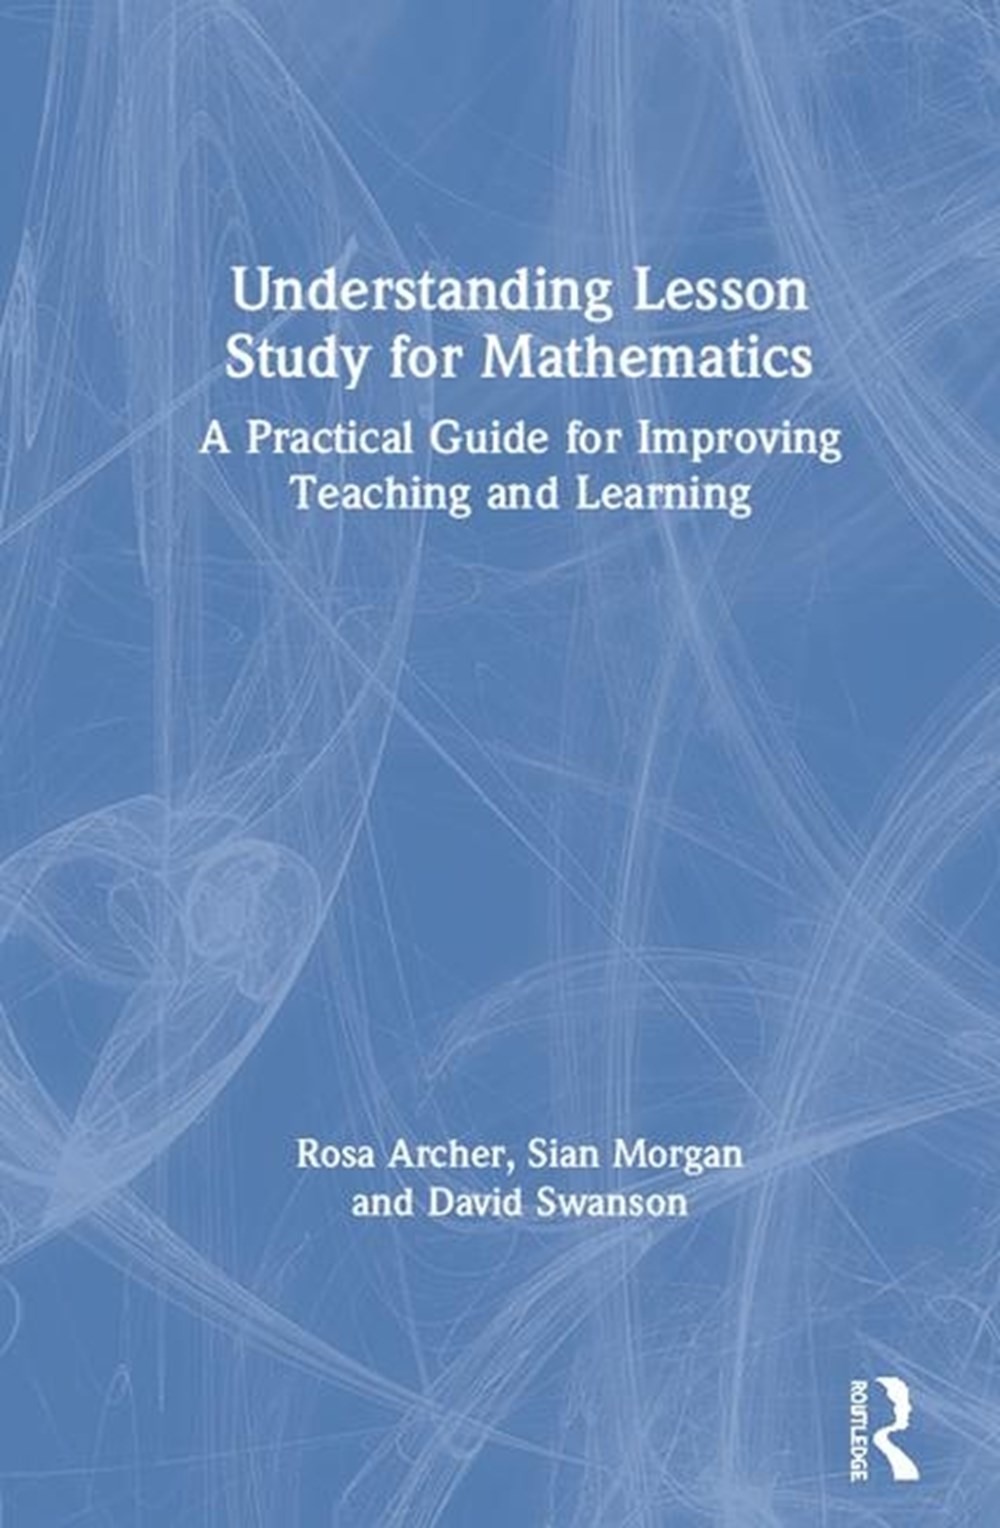 Understanding Lesson Study for Mathematics: A Practical Guide for Improving Teaching and Learning